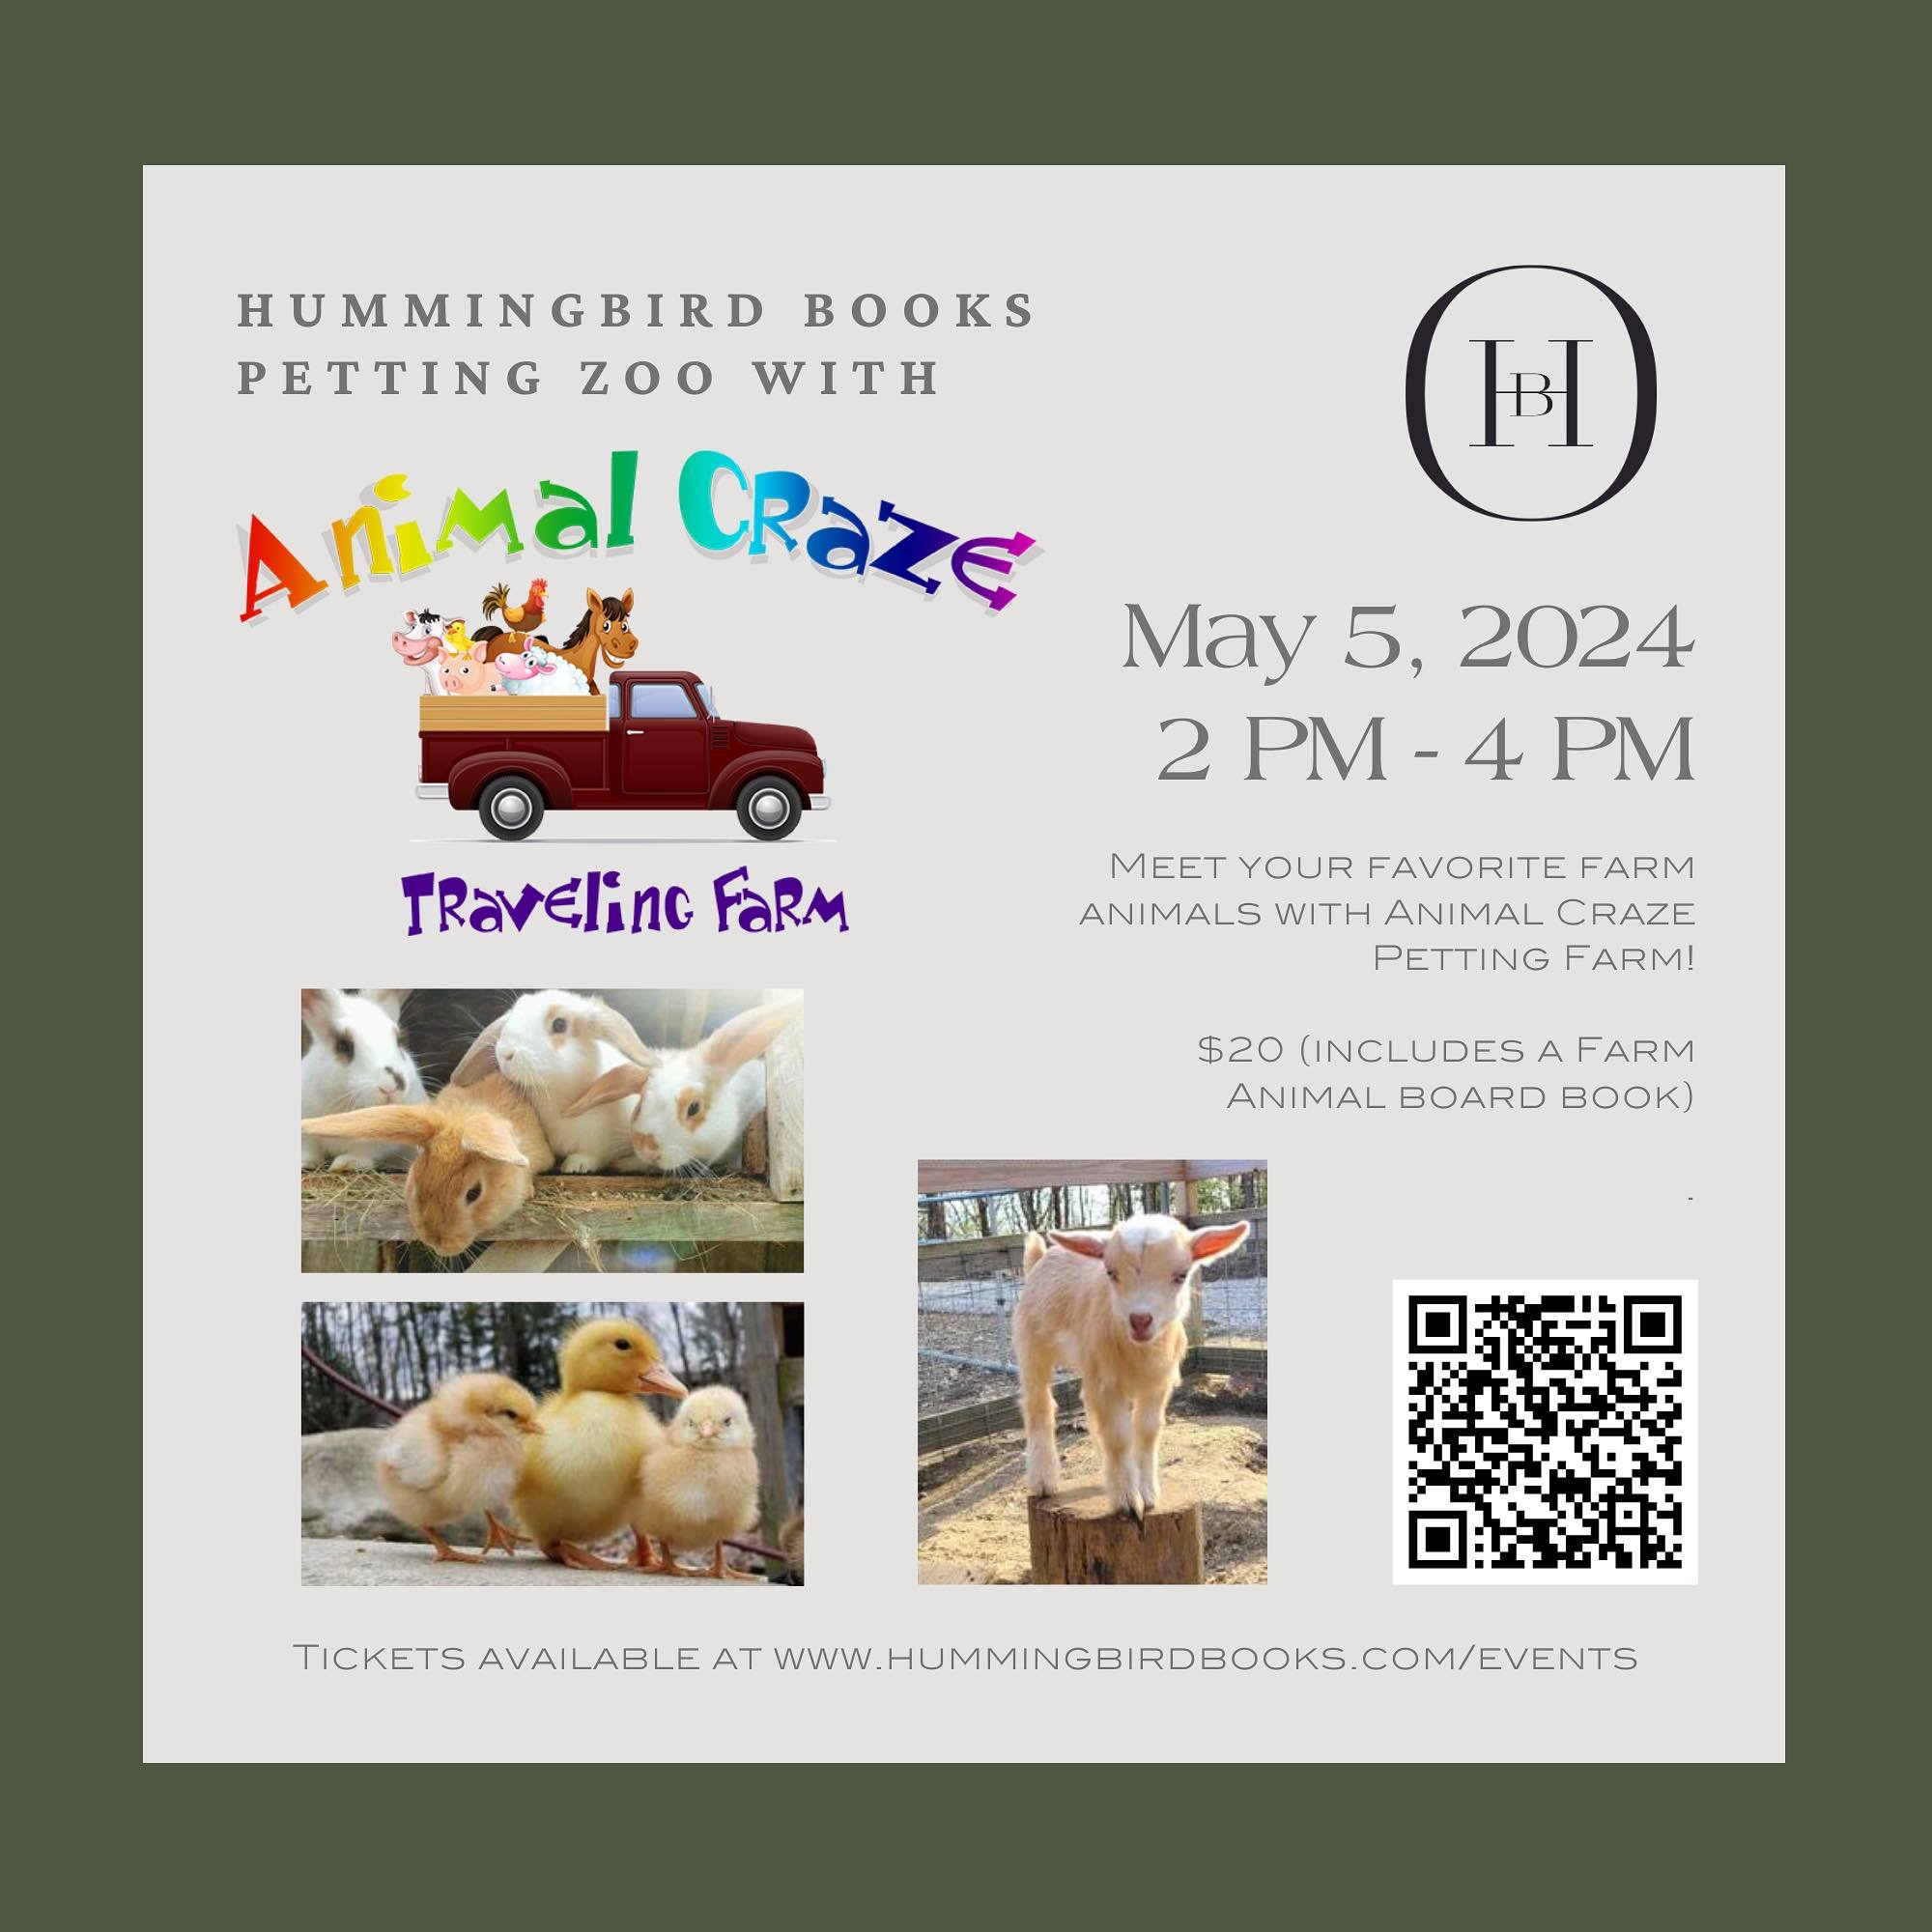 Meet your favorite farm animals at Hummingbird Books! On May 5, we are so excited to welcome @animalcraze.farm to the store. Get a chance to meet ducks, chicks, goats, and pigs! 🦆🐥🐐🐷

Tickets cover 15 minutes with the animals and a farm animal bo